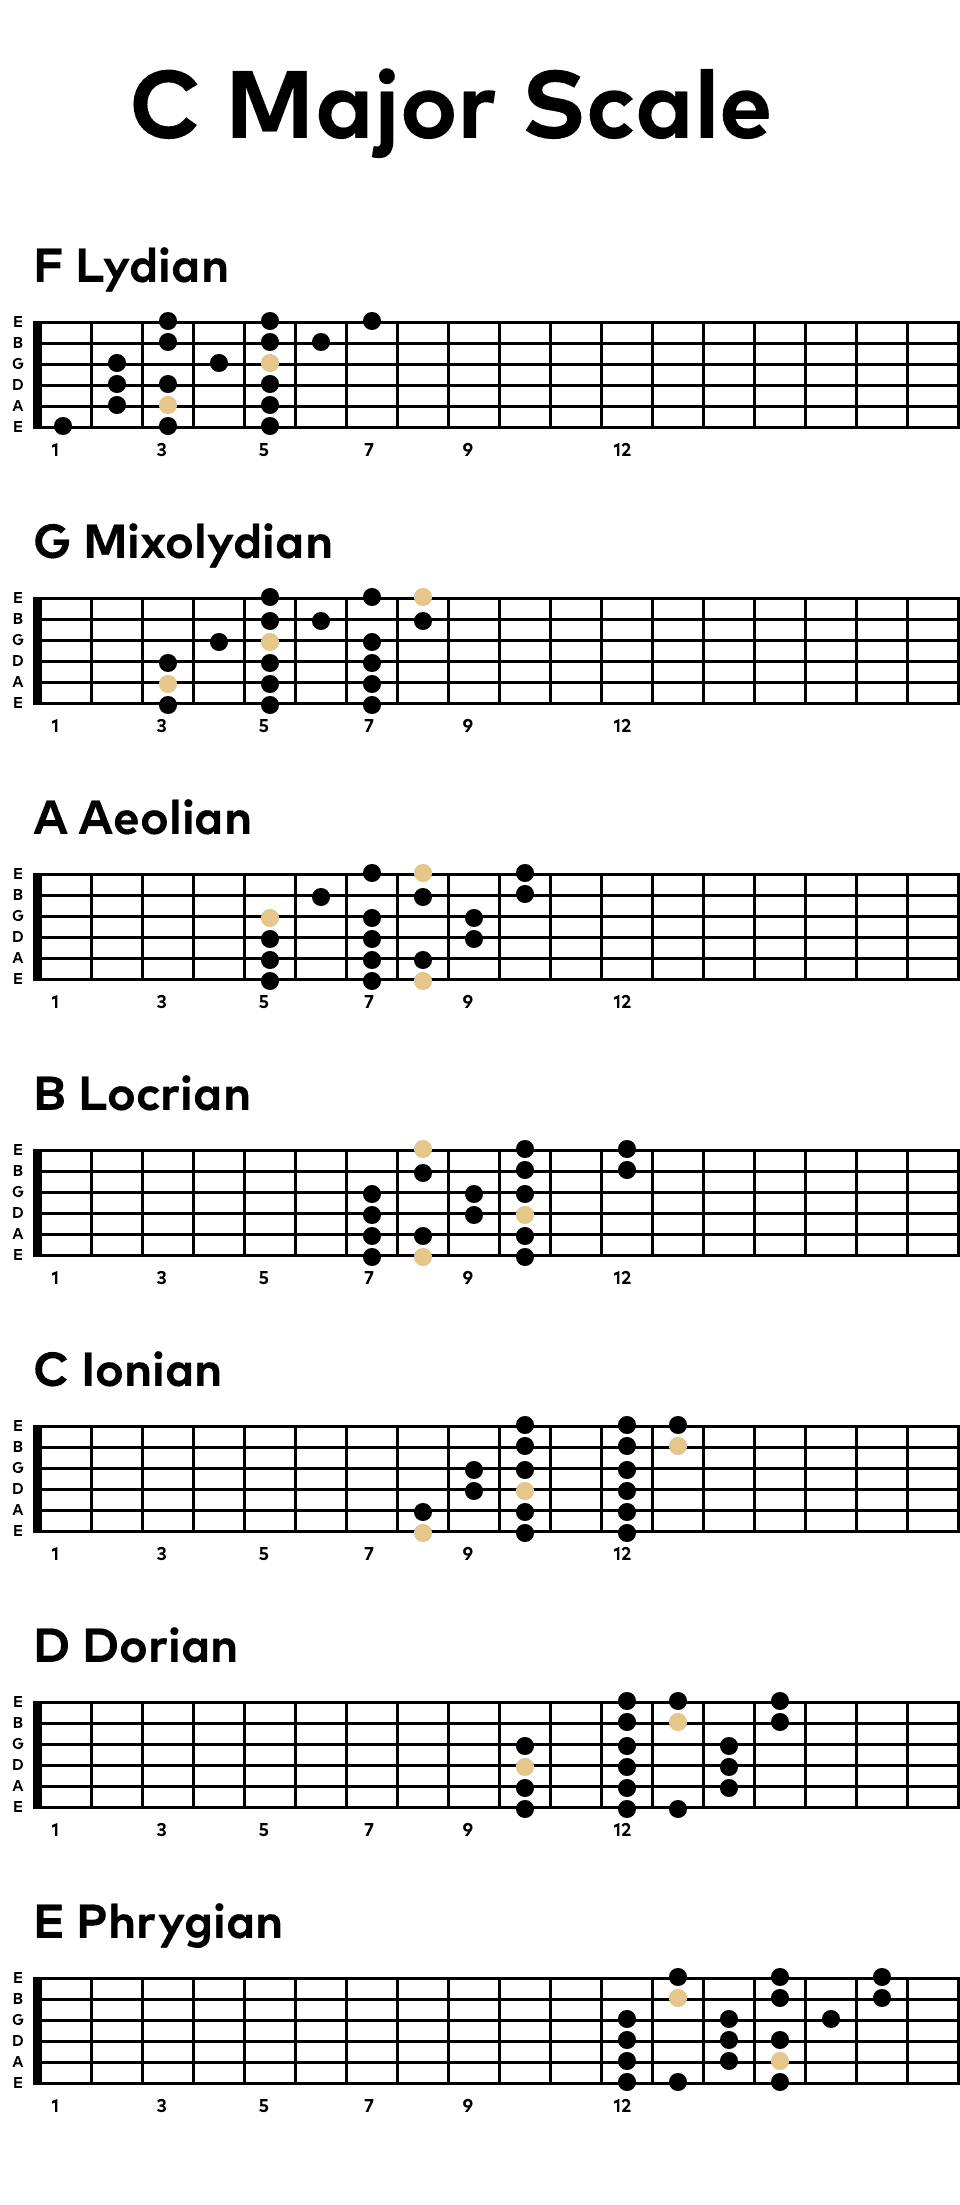 The 7 Patterns of the C Major Scale on the Guitar